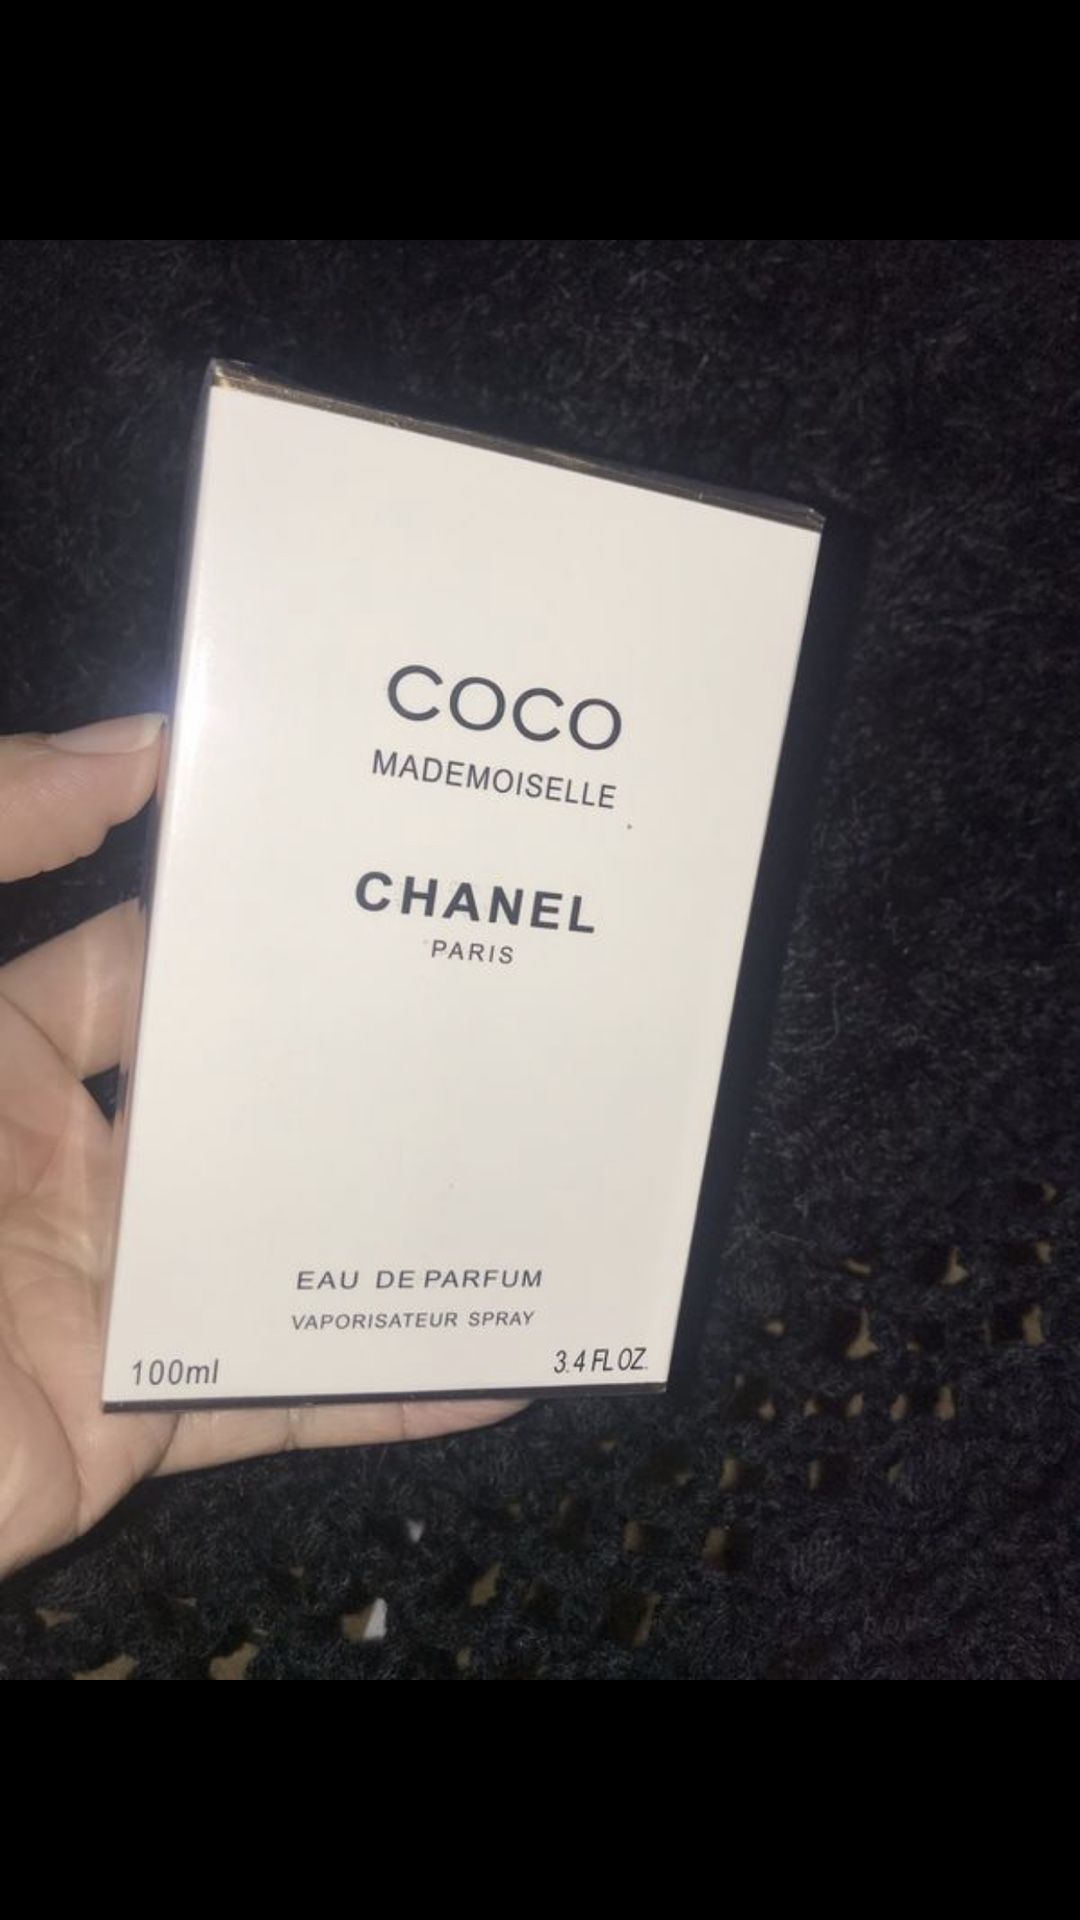 Coco Chanel Mademoiselle perfume 3.4 opened just to smell it is not my type $100 low offers will be no answer thanks!!